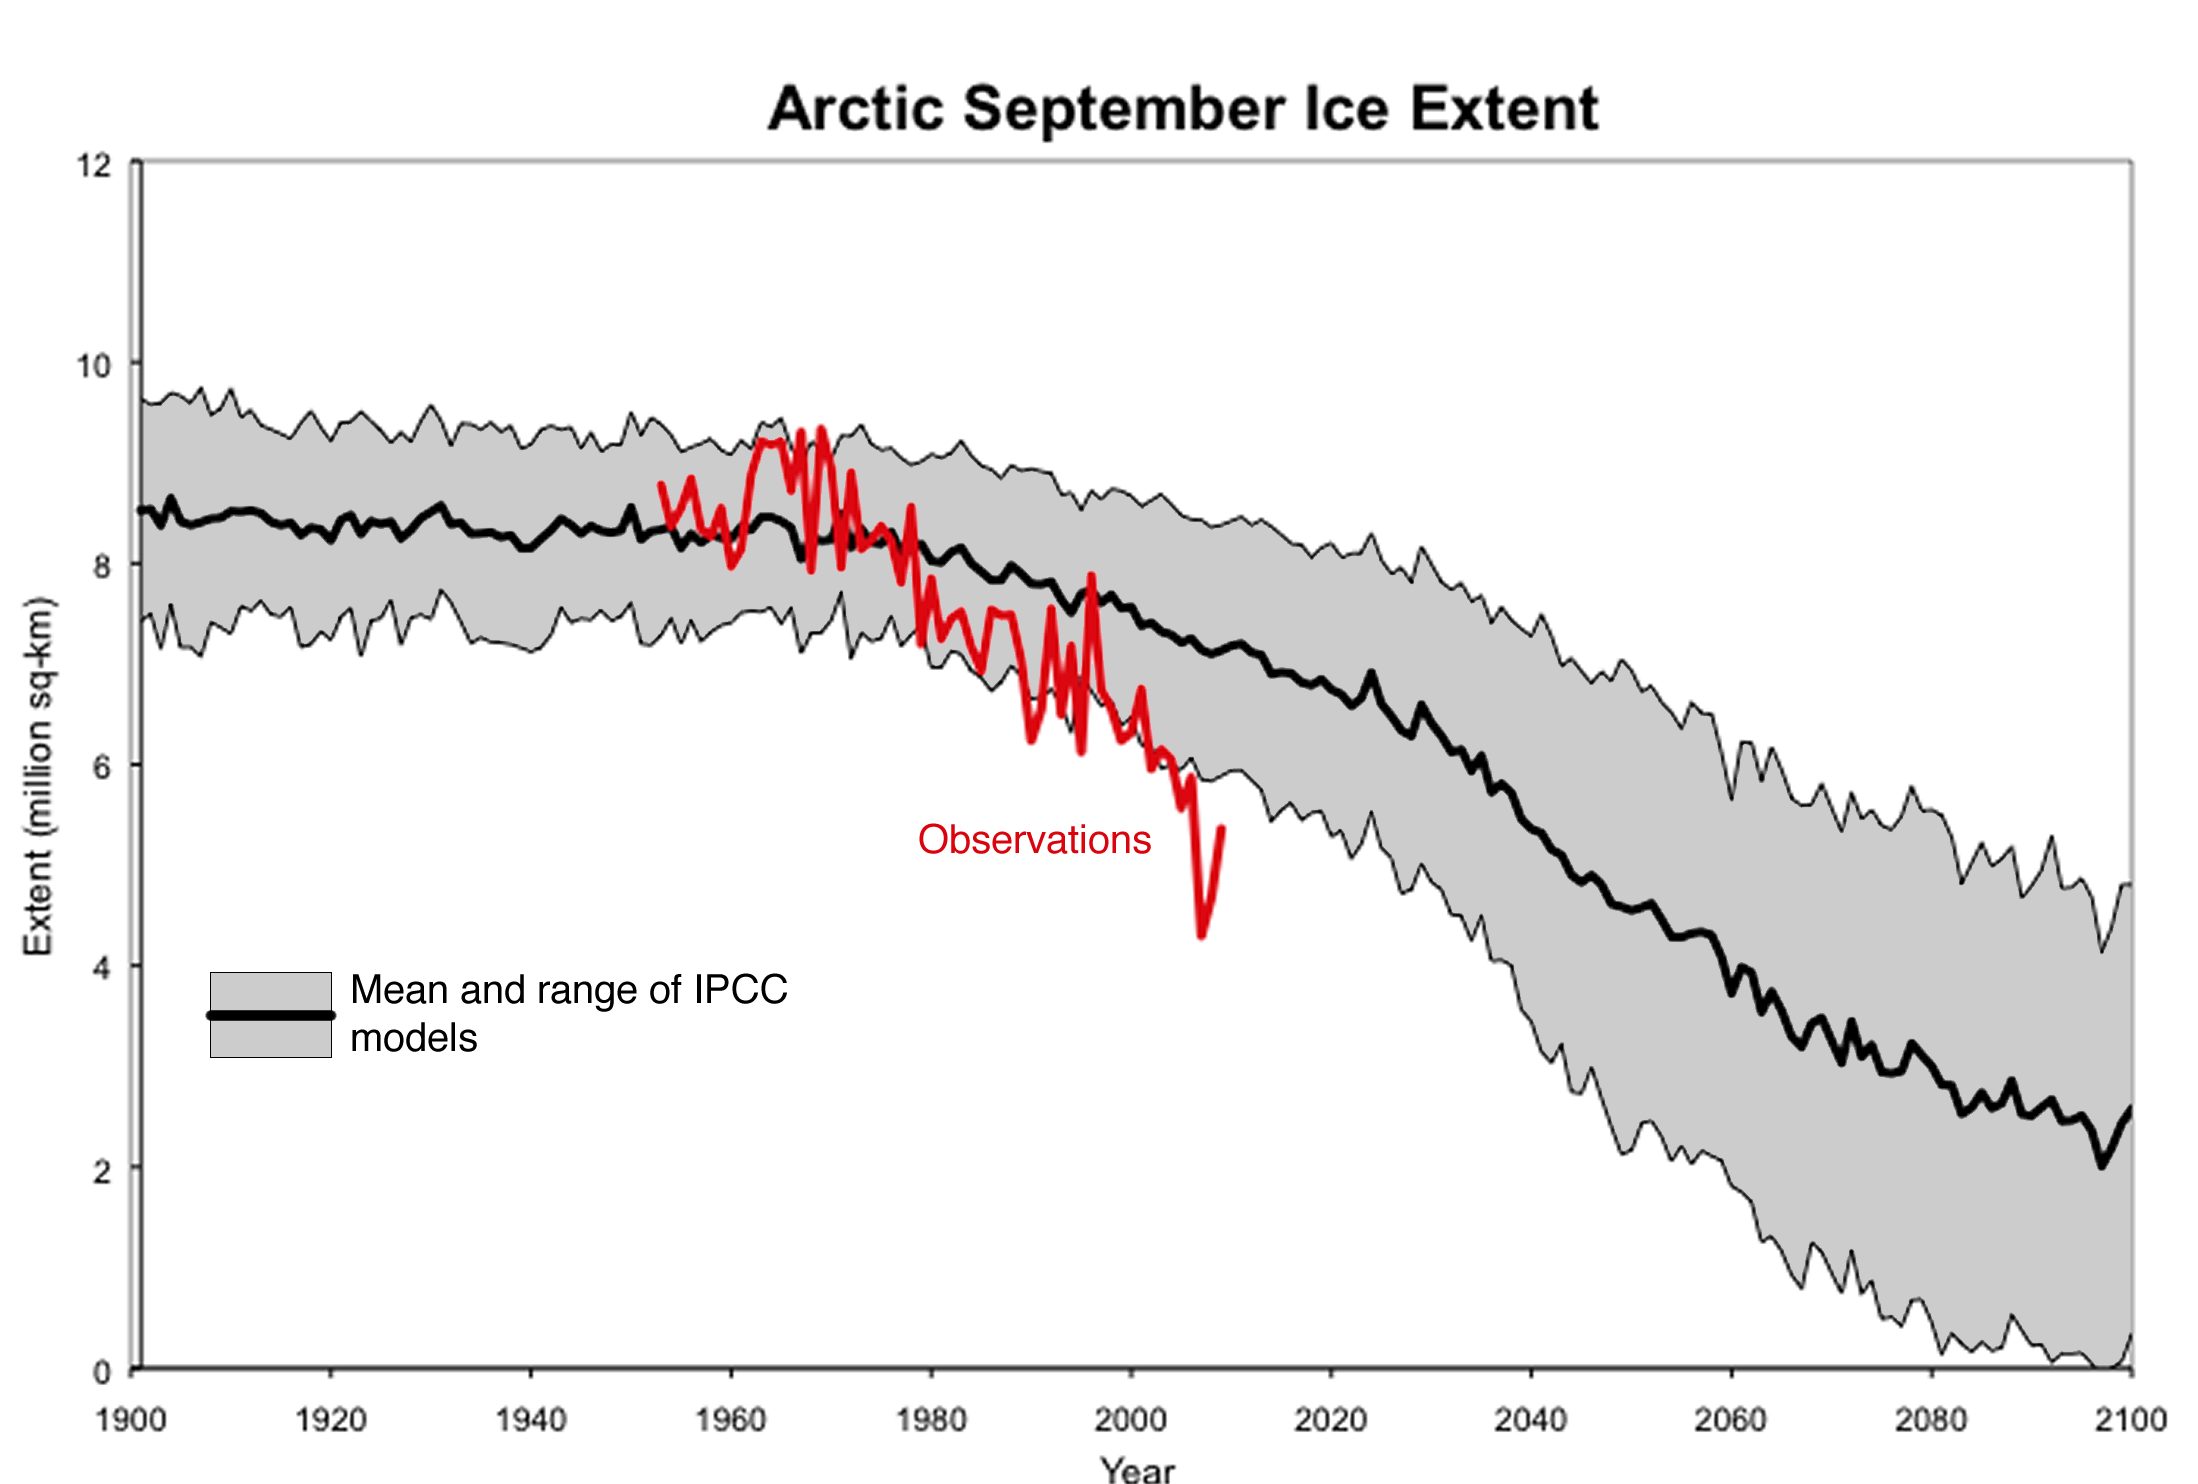 Arctic Is Thawing So Fast Scientists Are Losing Their Measuring Tools